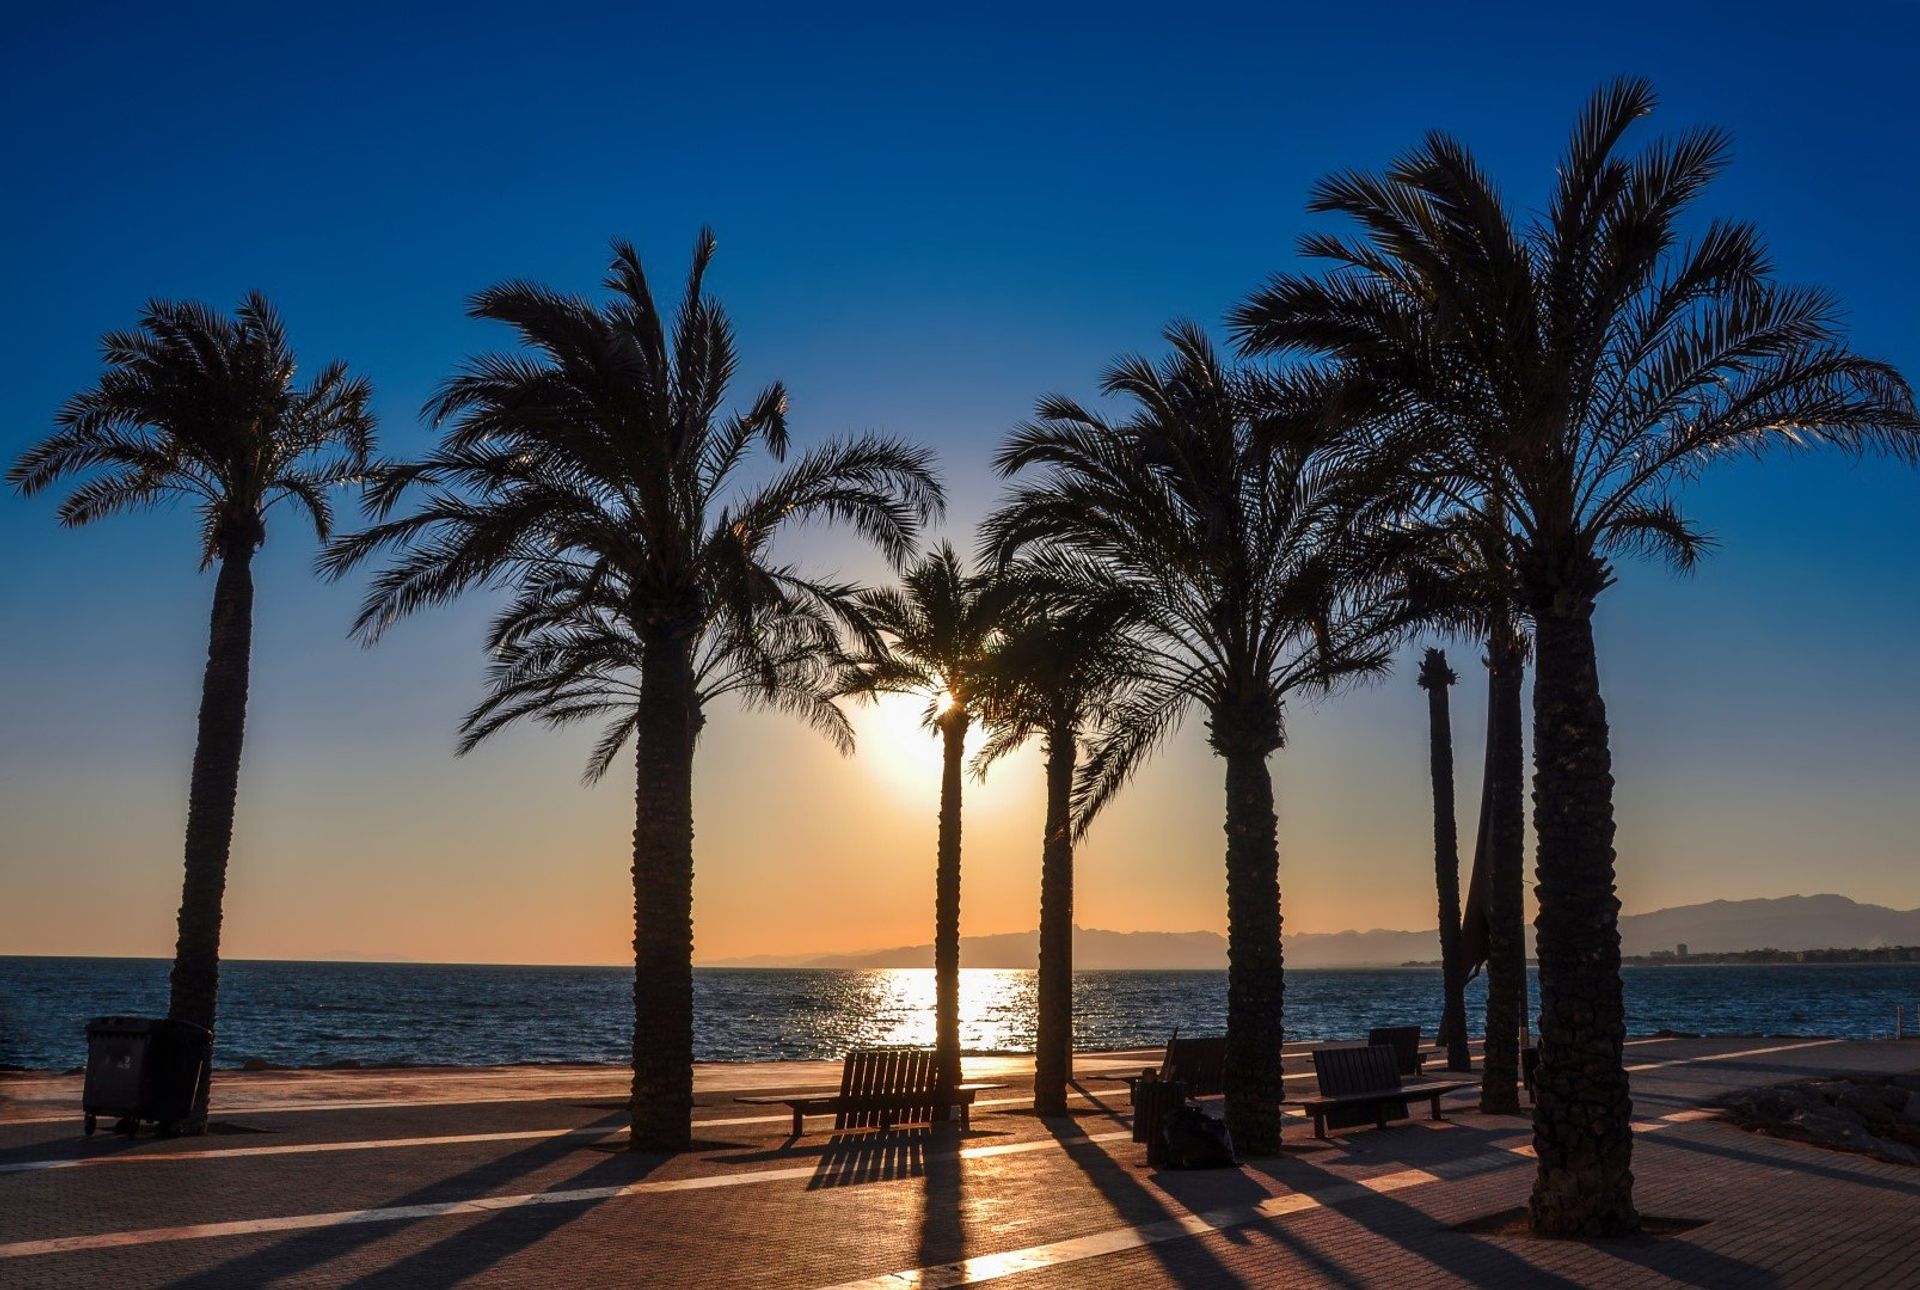 A slice of paradise! Salou's palm-lined beachfront at sunset